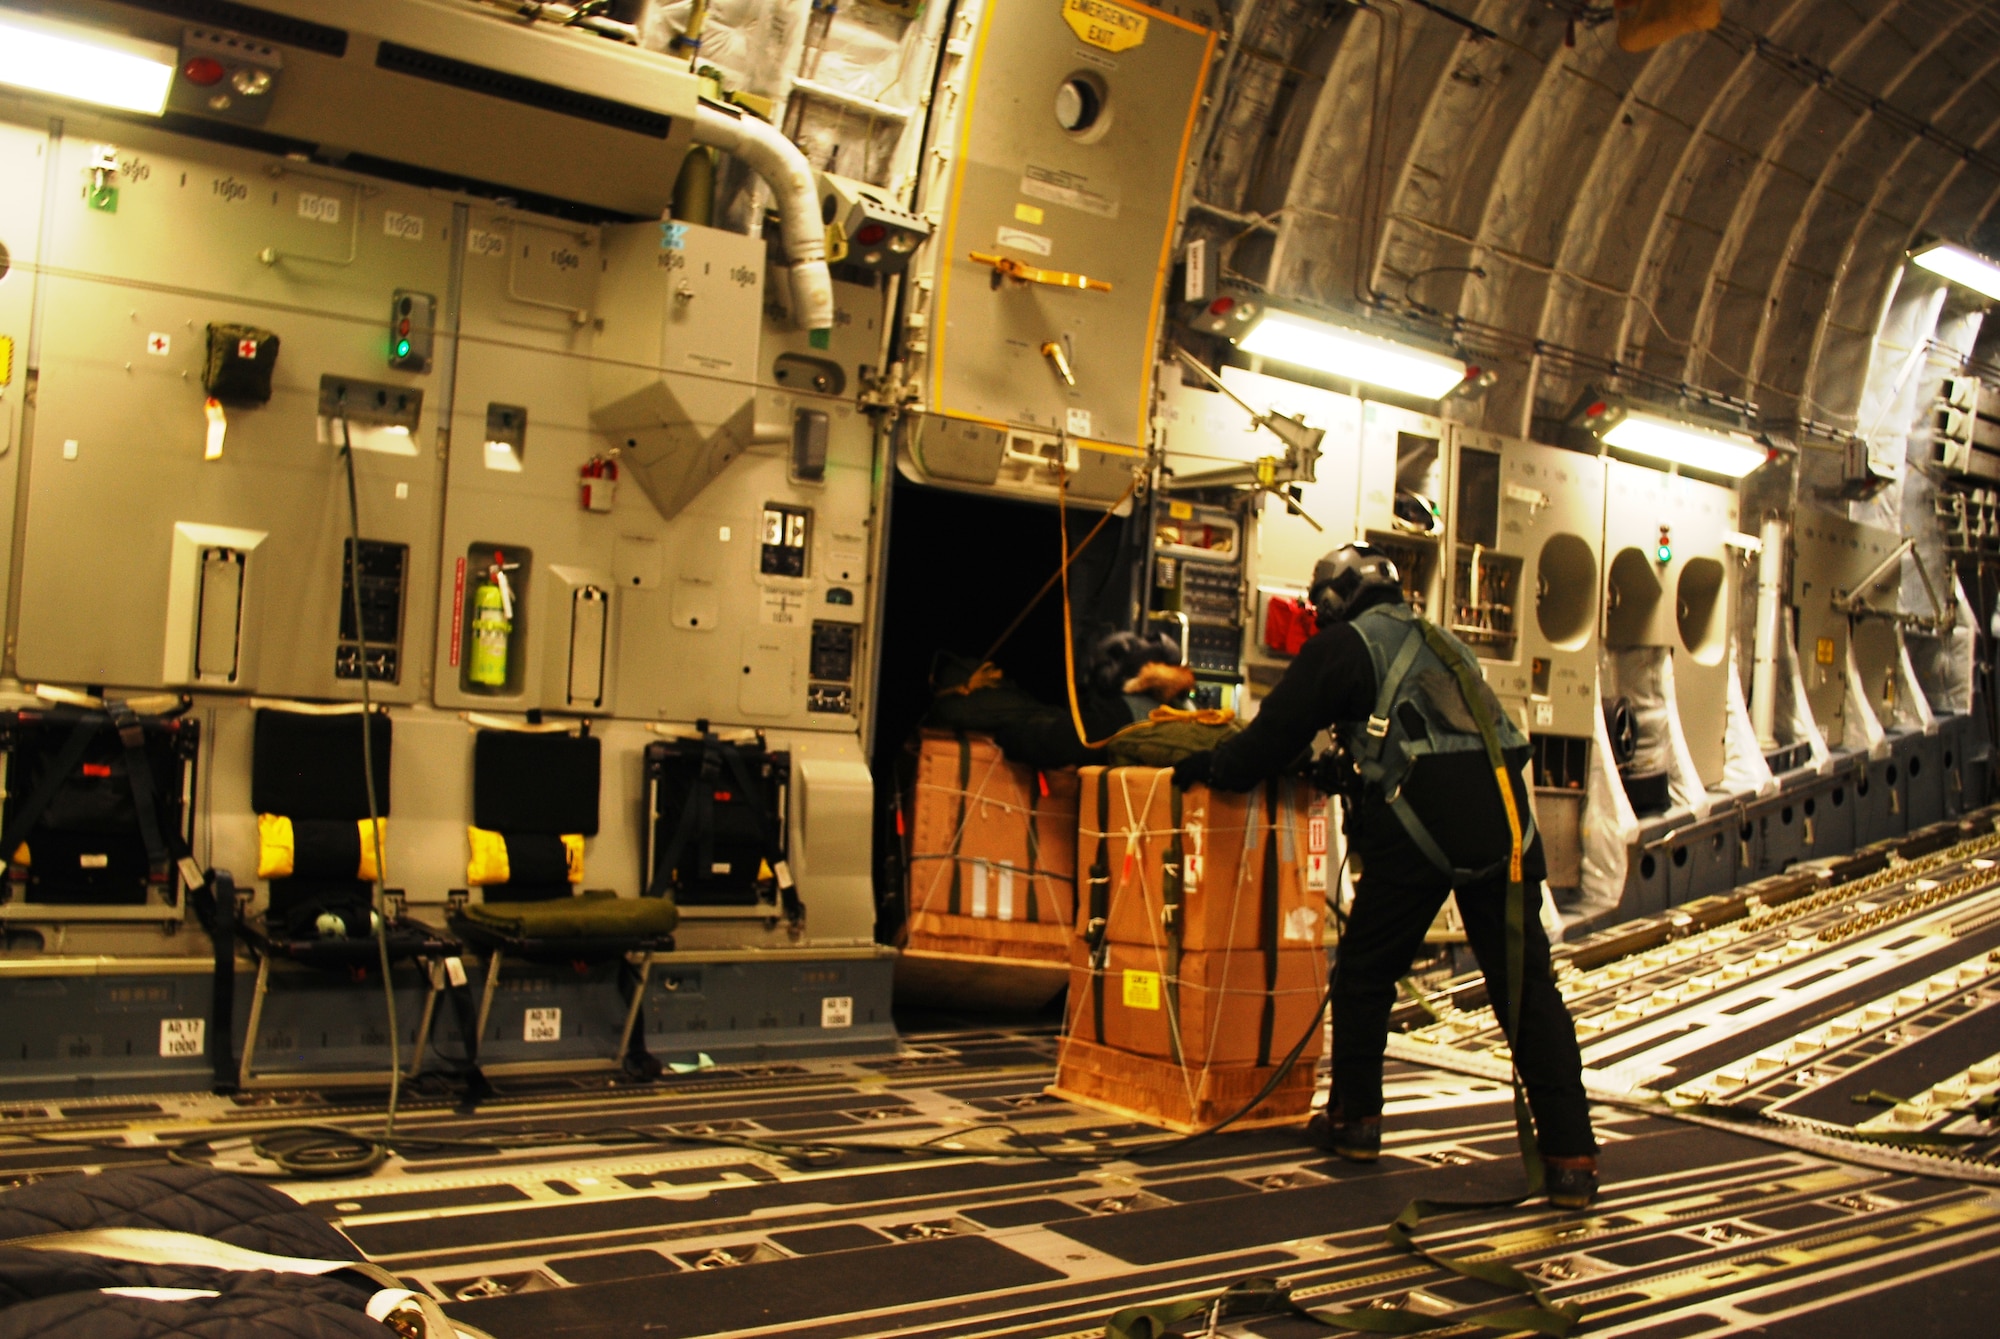 A C-17 Globemaster III Loadmaster, forward-based with the 304th Expeditionary Airlift Squadron at Christchurch, New Zealand,prepares to airdrop urgently needed medical supplies near the Amundsen-Scott South Pole Station .  The supply drop is part of Operation Deep Freeze (ODF) and in support of the U.S. Antarctic Program, which is managed by the National Science Foundation (NSF). ODF is an annual U.S. Air Force-led mission to lend operational and logistical support to the National Science Foundation's research and exploration in Antarctica.(courtesy image/Chief Master Sgt. Jim Masura)(Released)